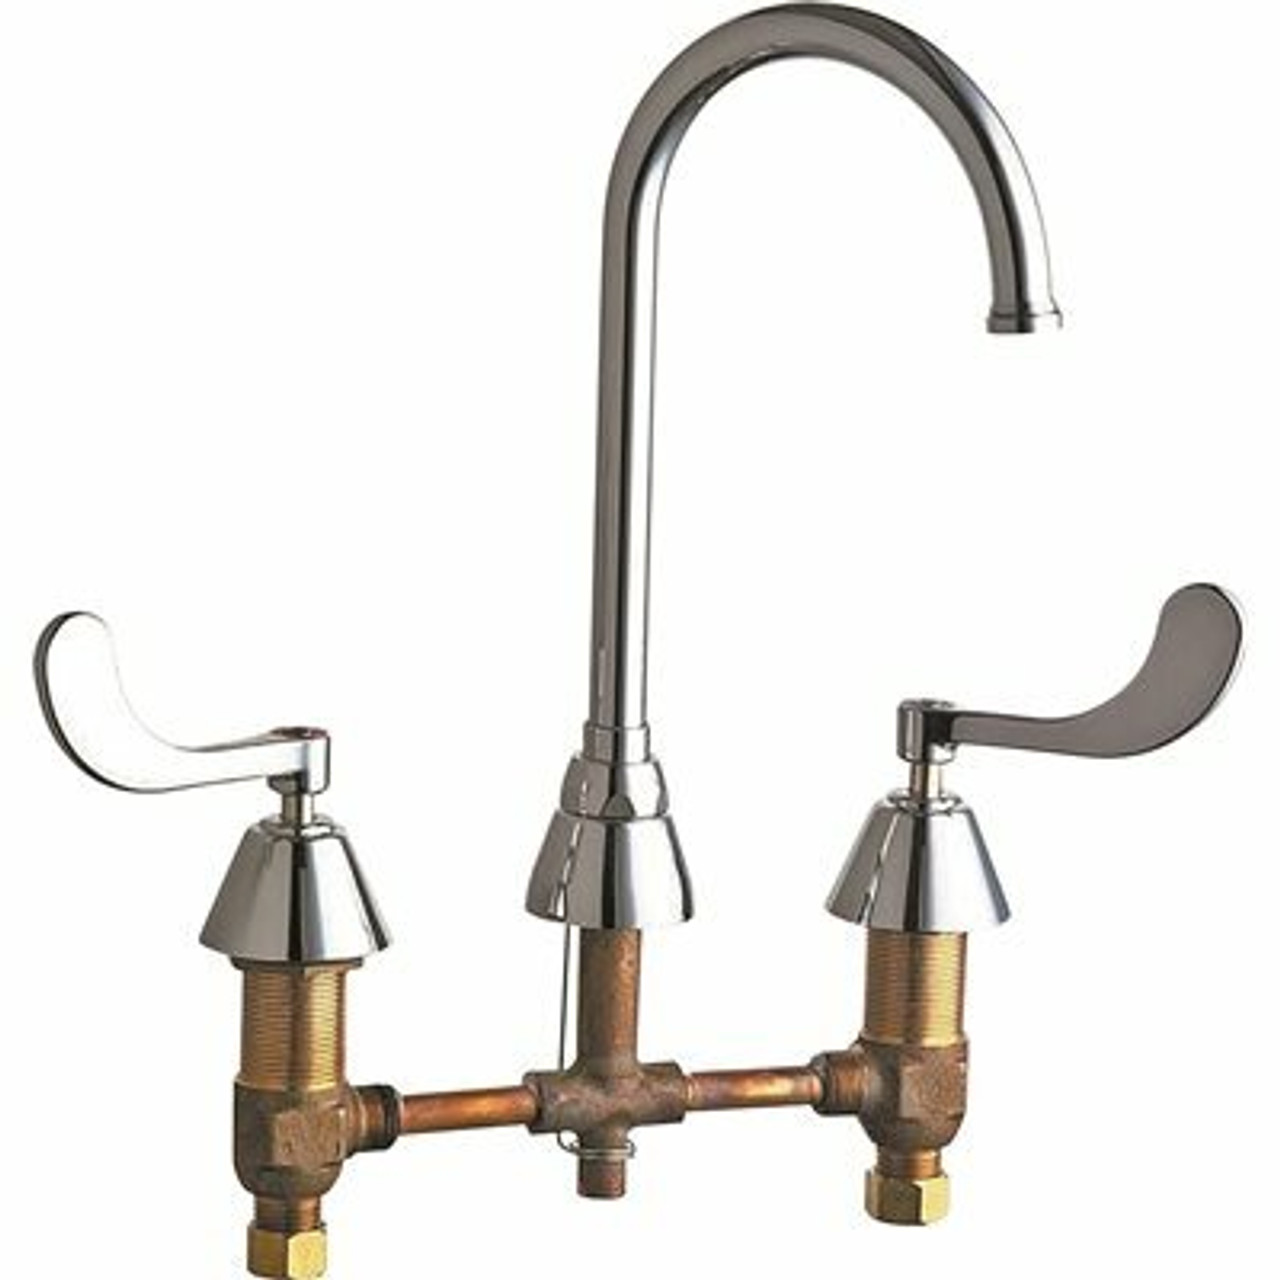 Chicago Faucets Wall-Mounted Hospital Sink Faucet, 5.25-Inch Gooseneck Spout, Wristblade Handles, 2.0 Gpm Spray